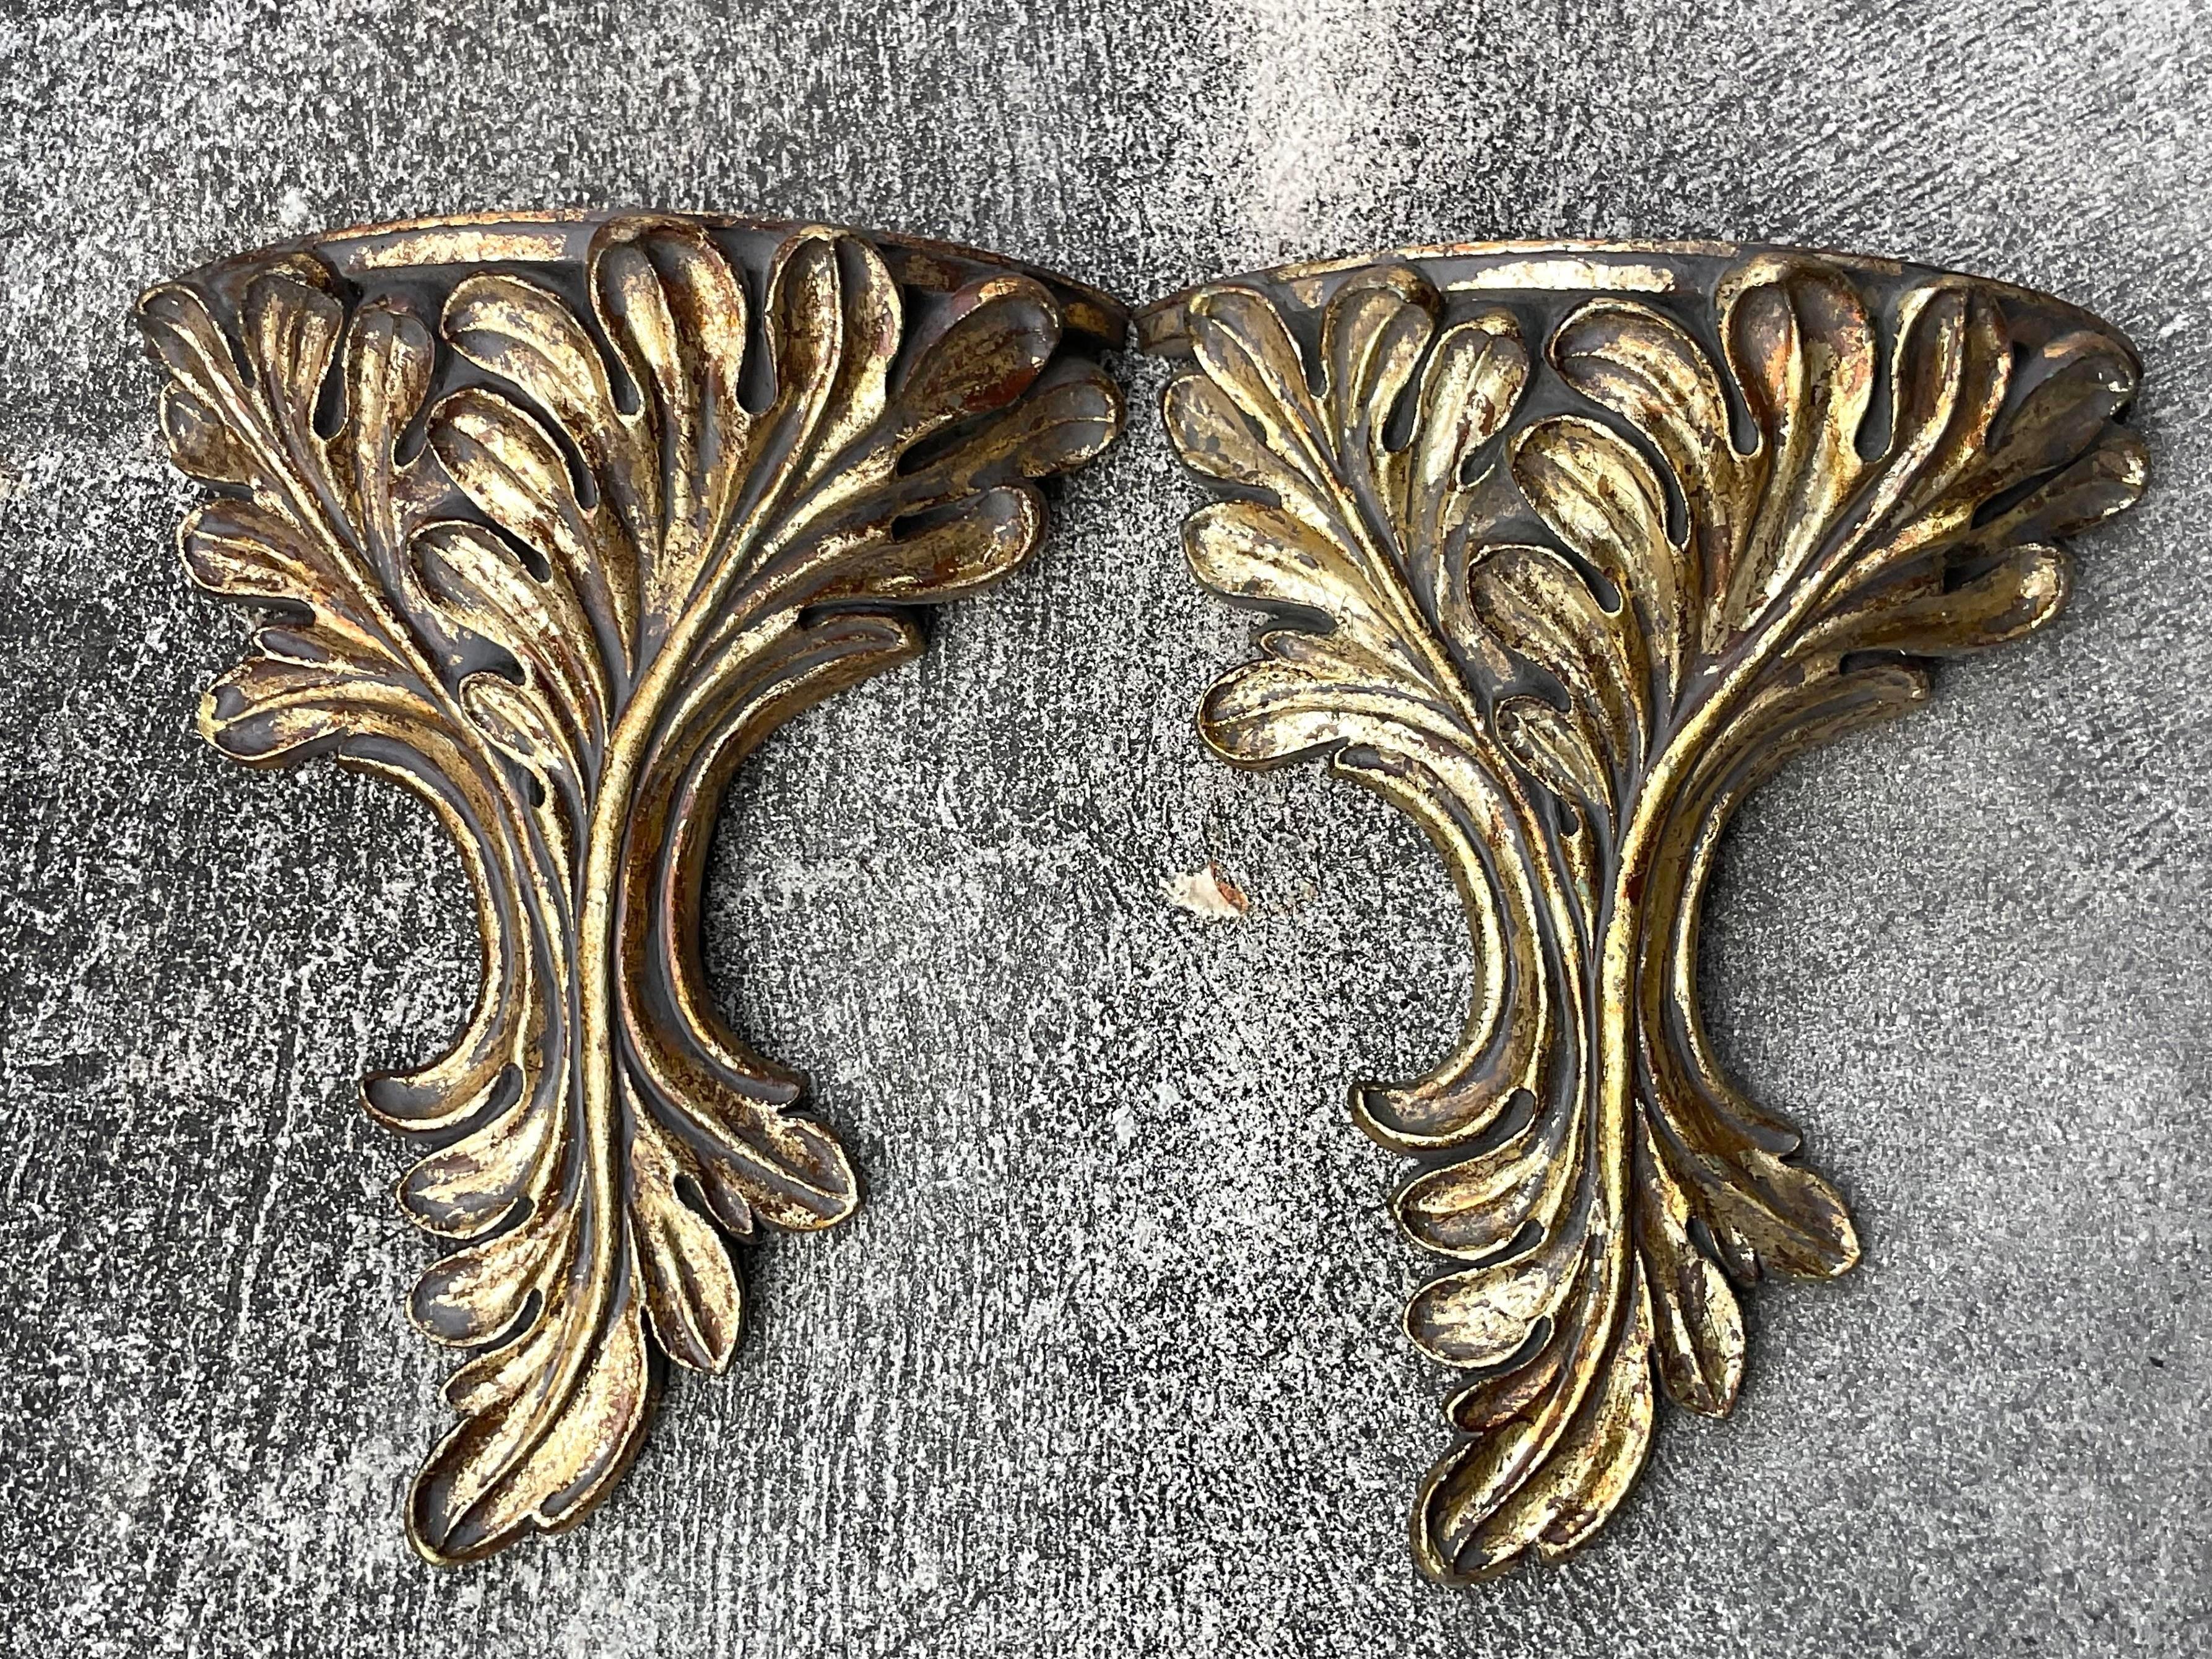 A fabulous pair of vintage Regency wall brackets. Chic hand carved laurels with a silvery gold finish. Acquired from a Palm Beach estate.